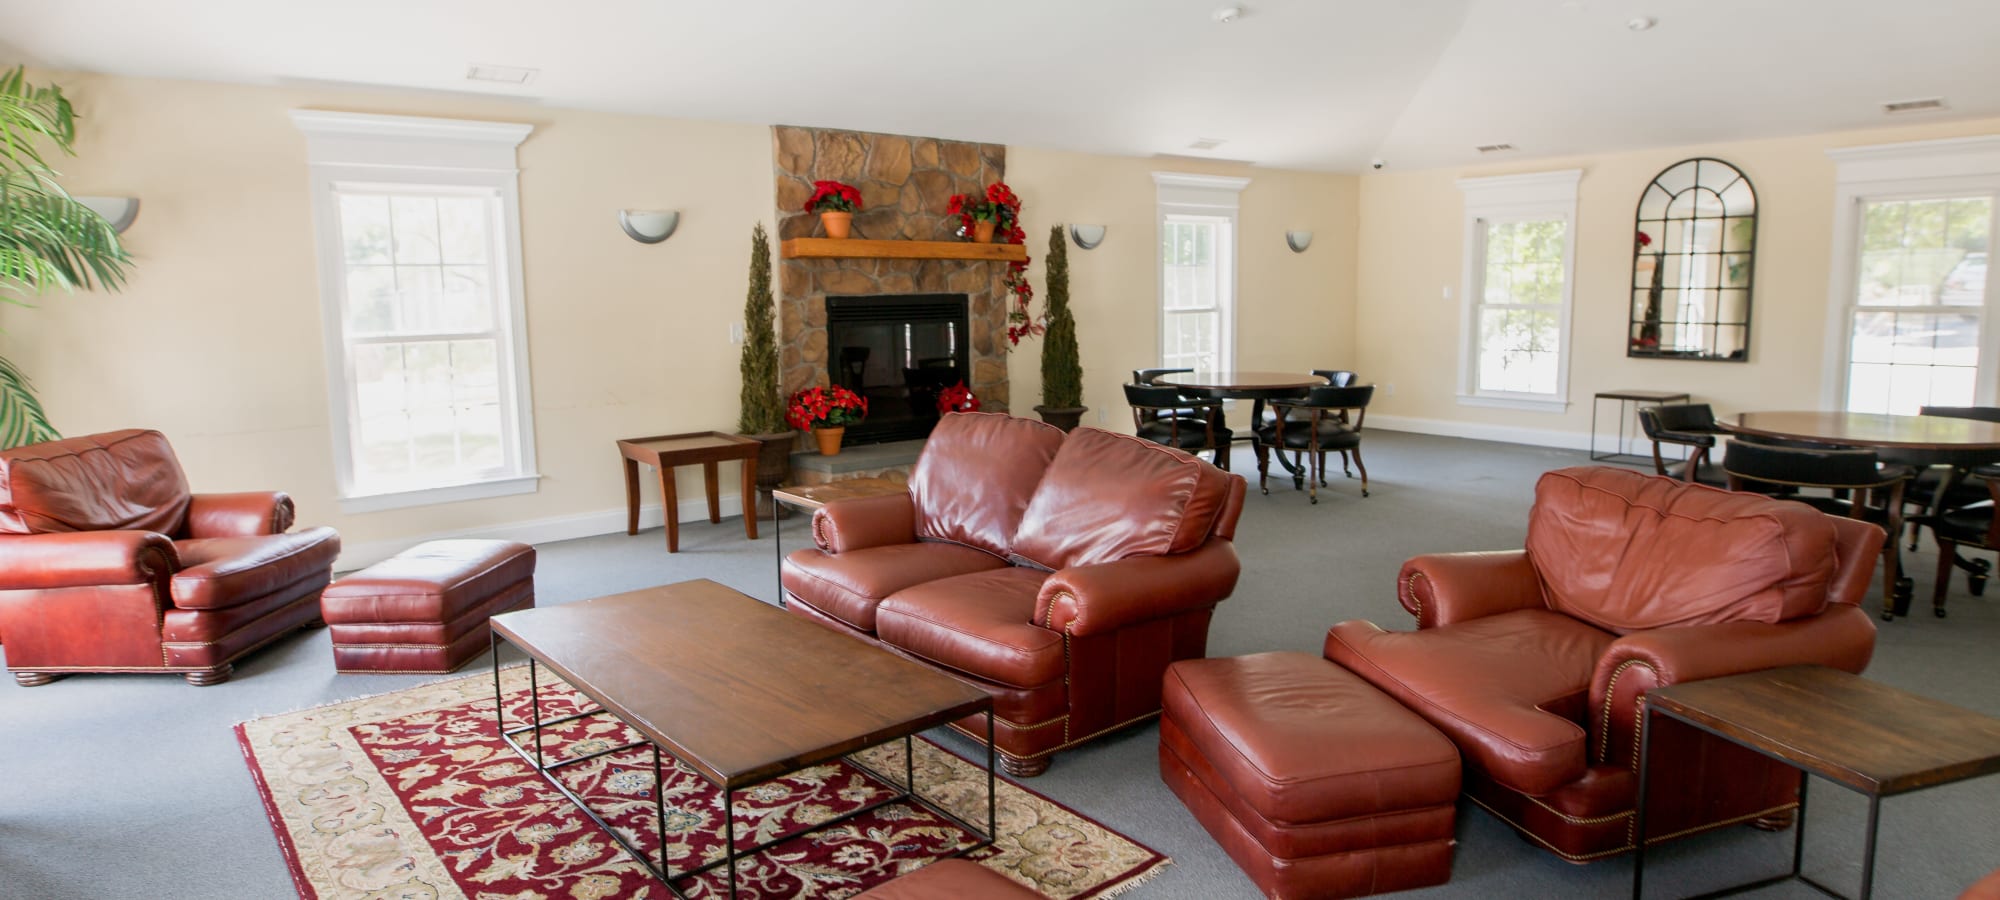 communal living space at Villas at Southern Ridge in Charlottesville, Virginia